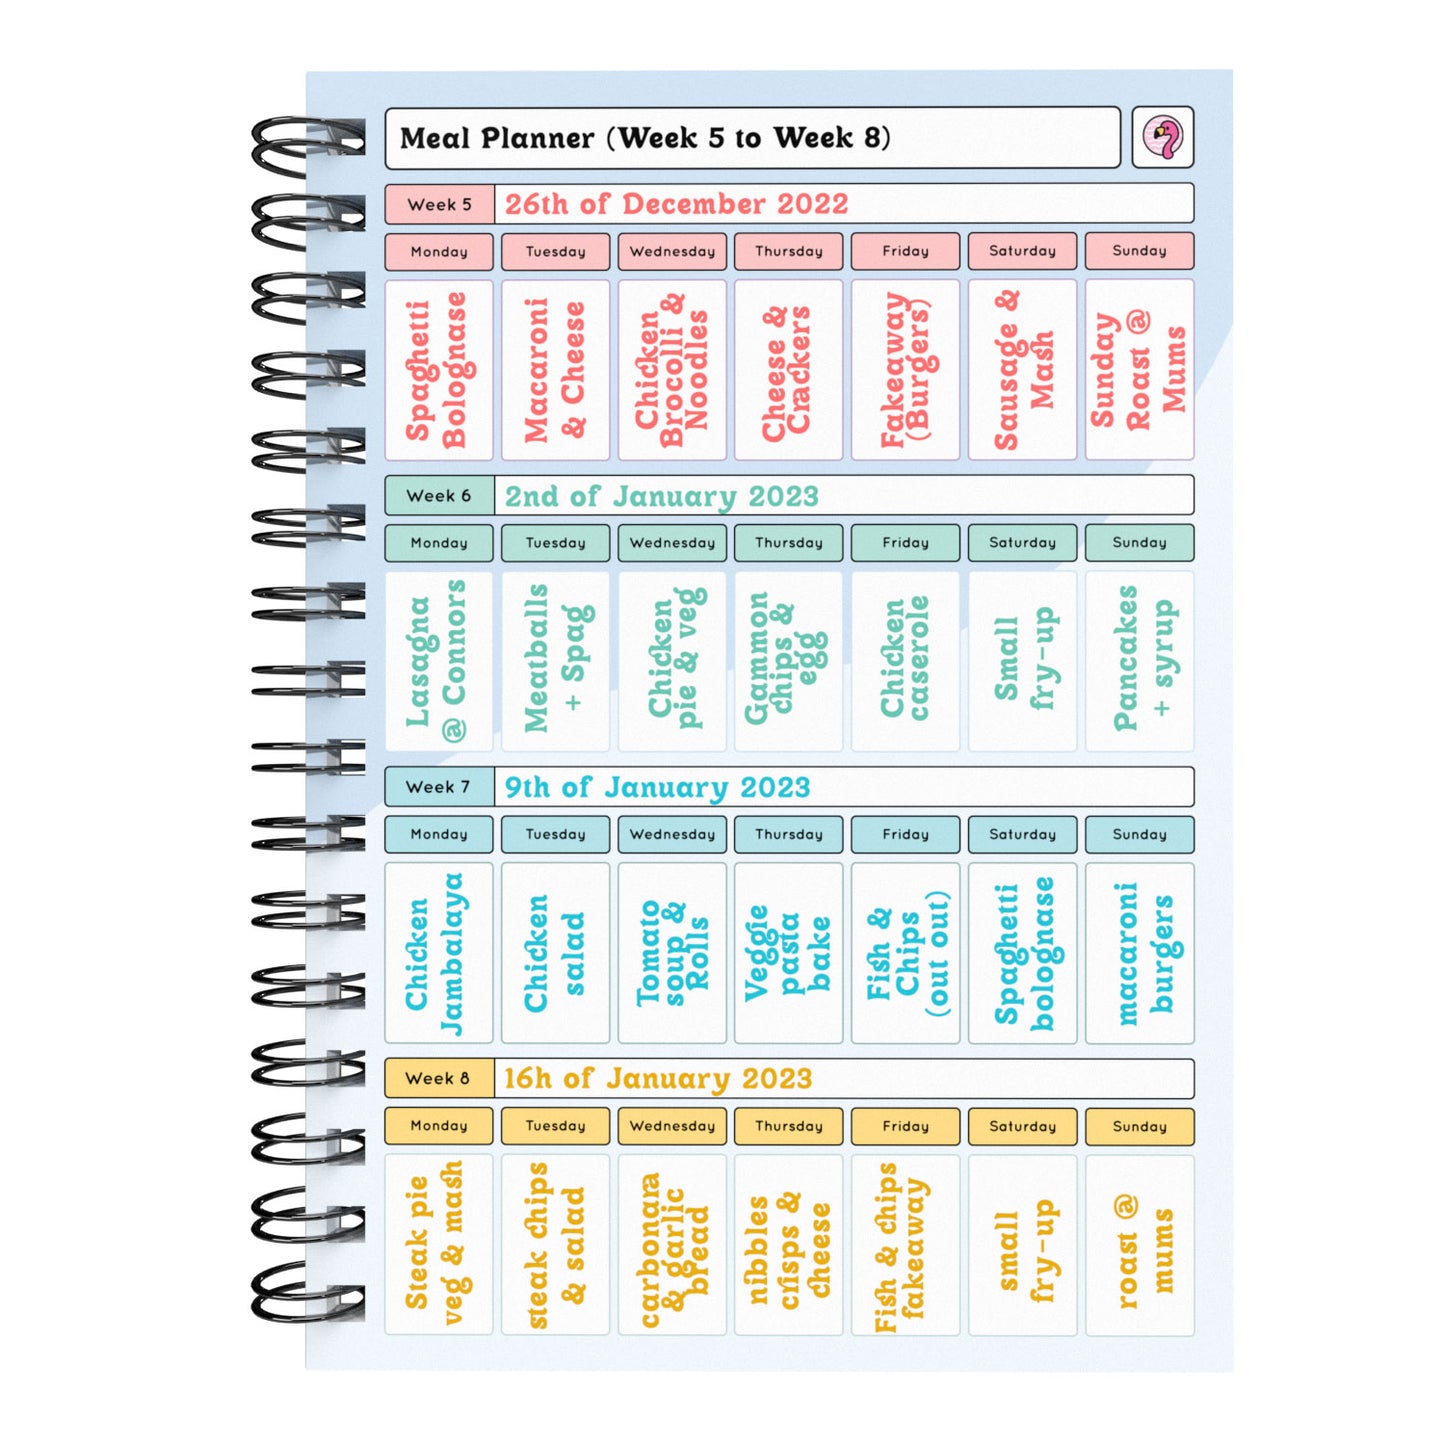 Food Diary - C37 - Calorie Counting